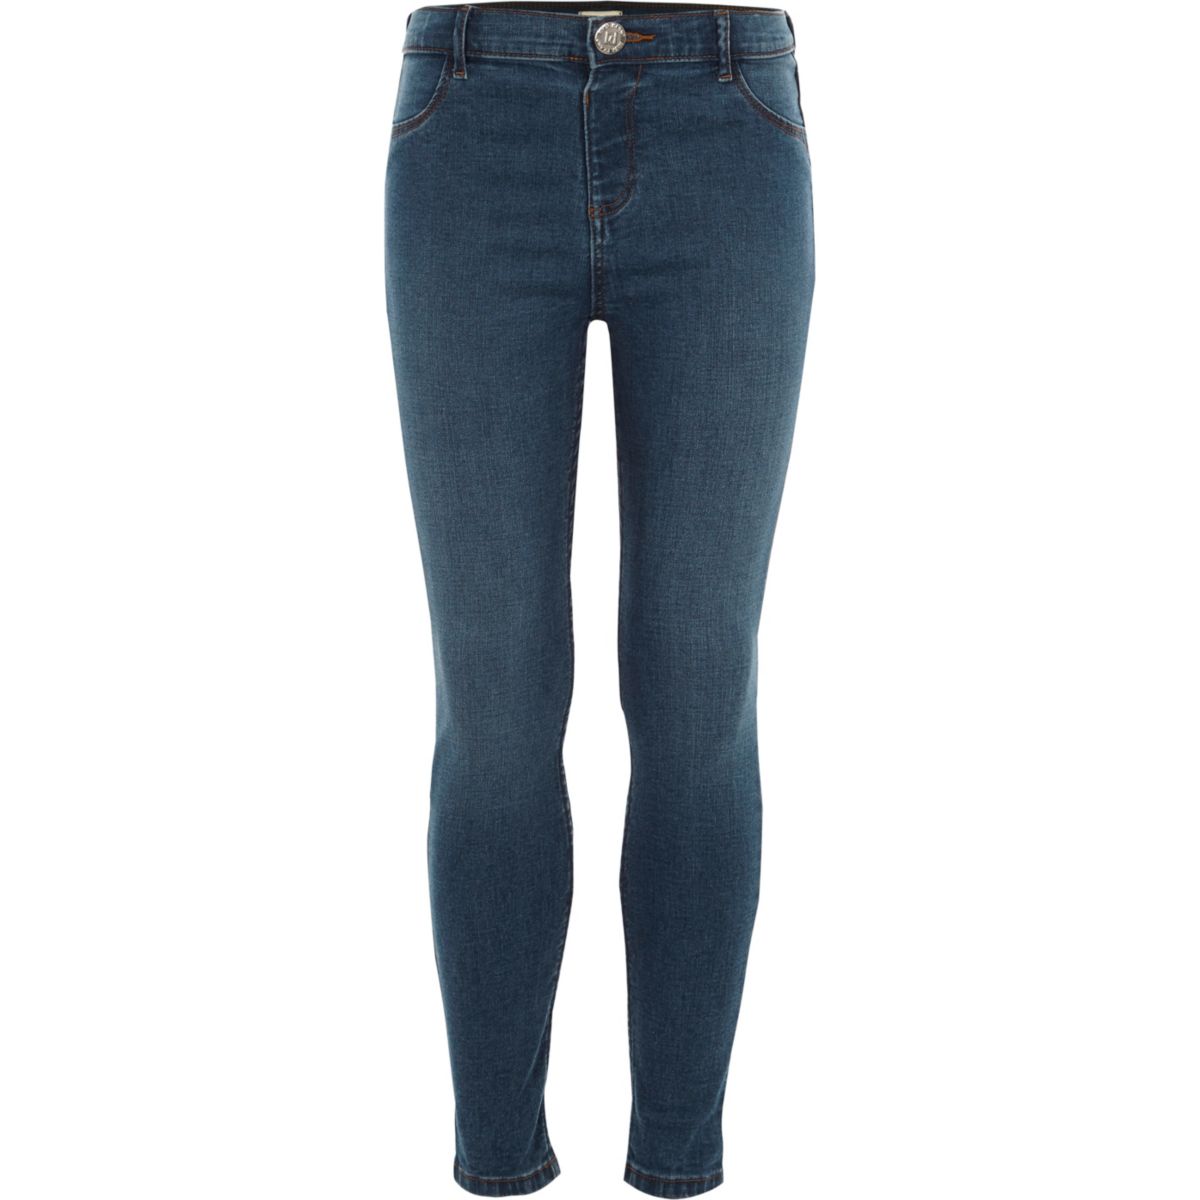 Girls Blue Molly Skinny Jeans (River Island)